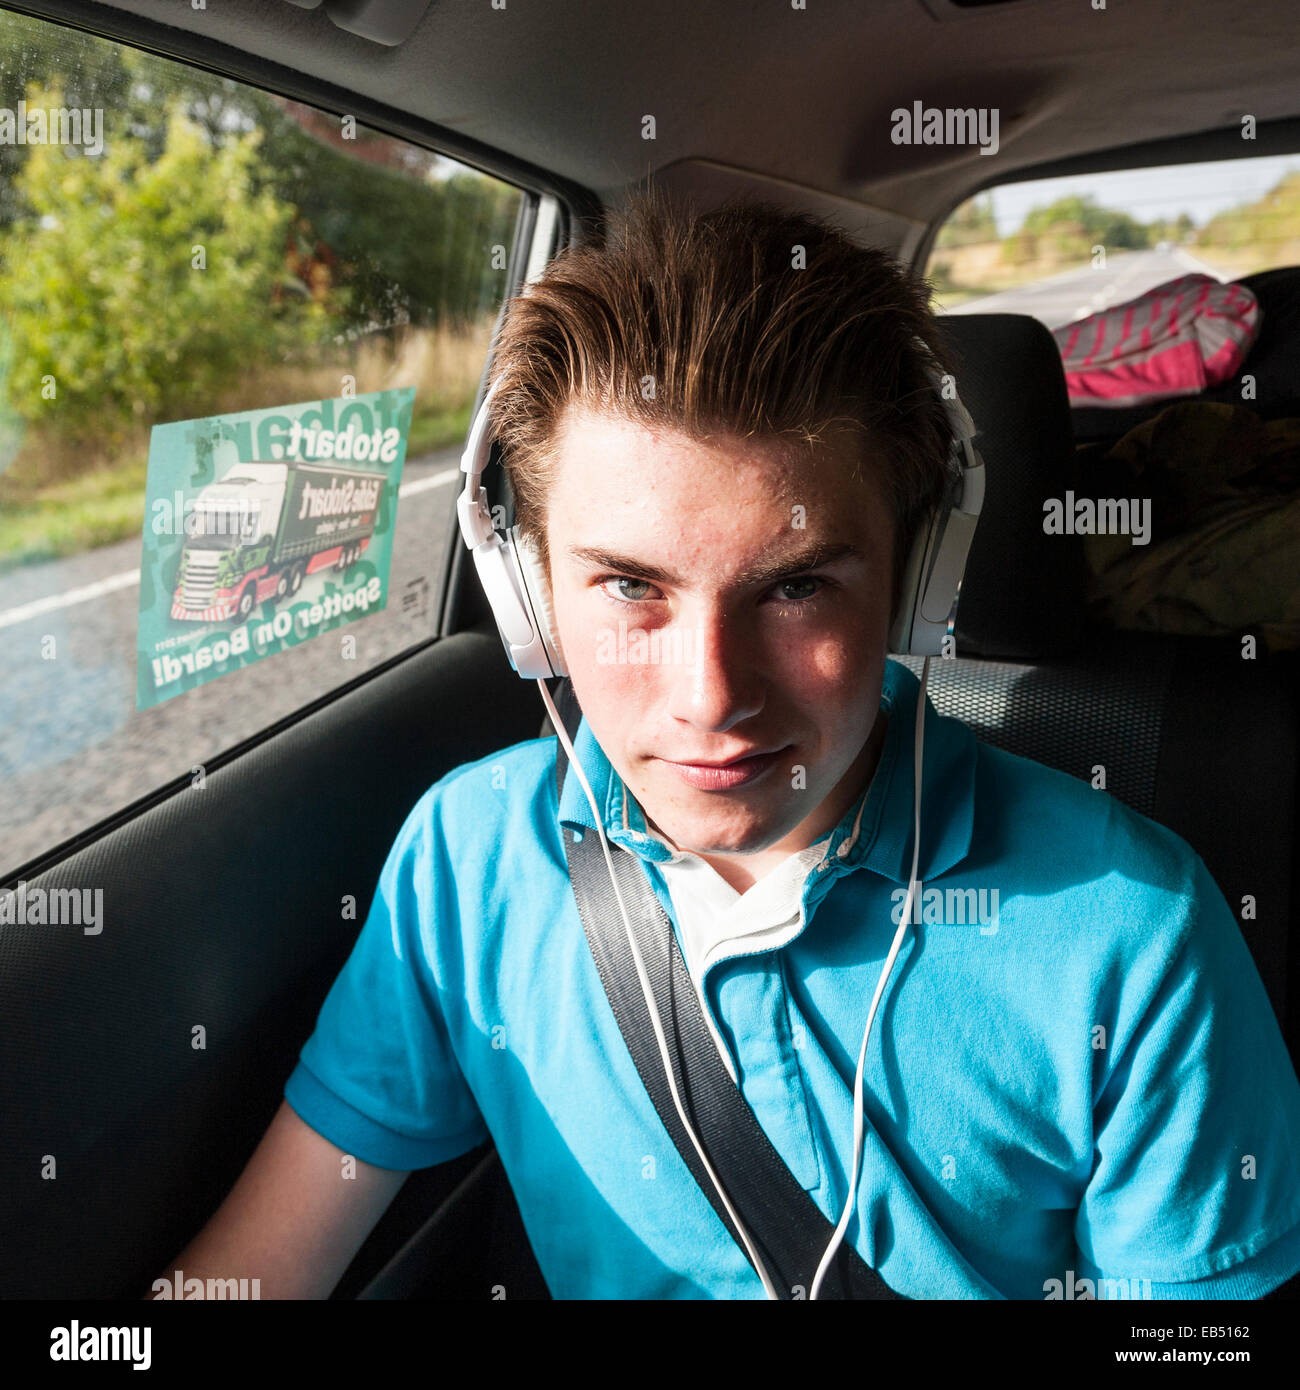 A 14 year old boy listening to music in the car Stock Photo